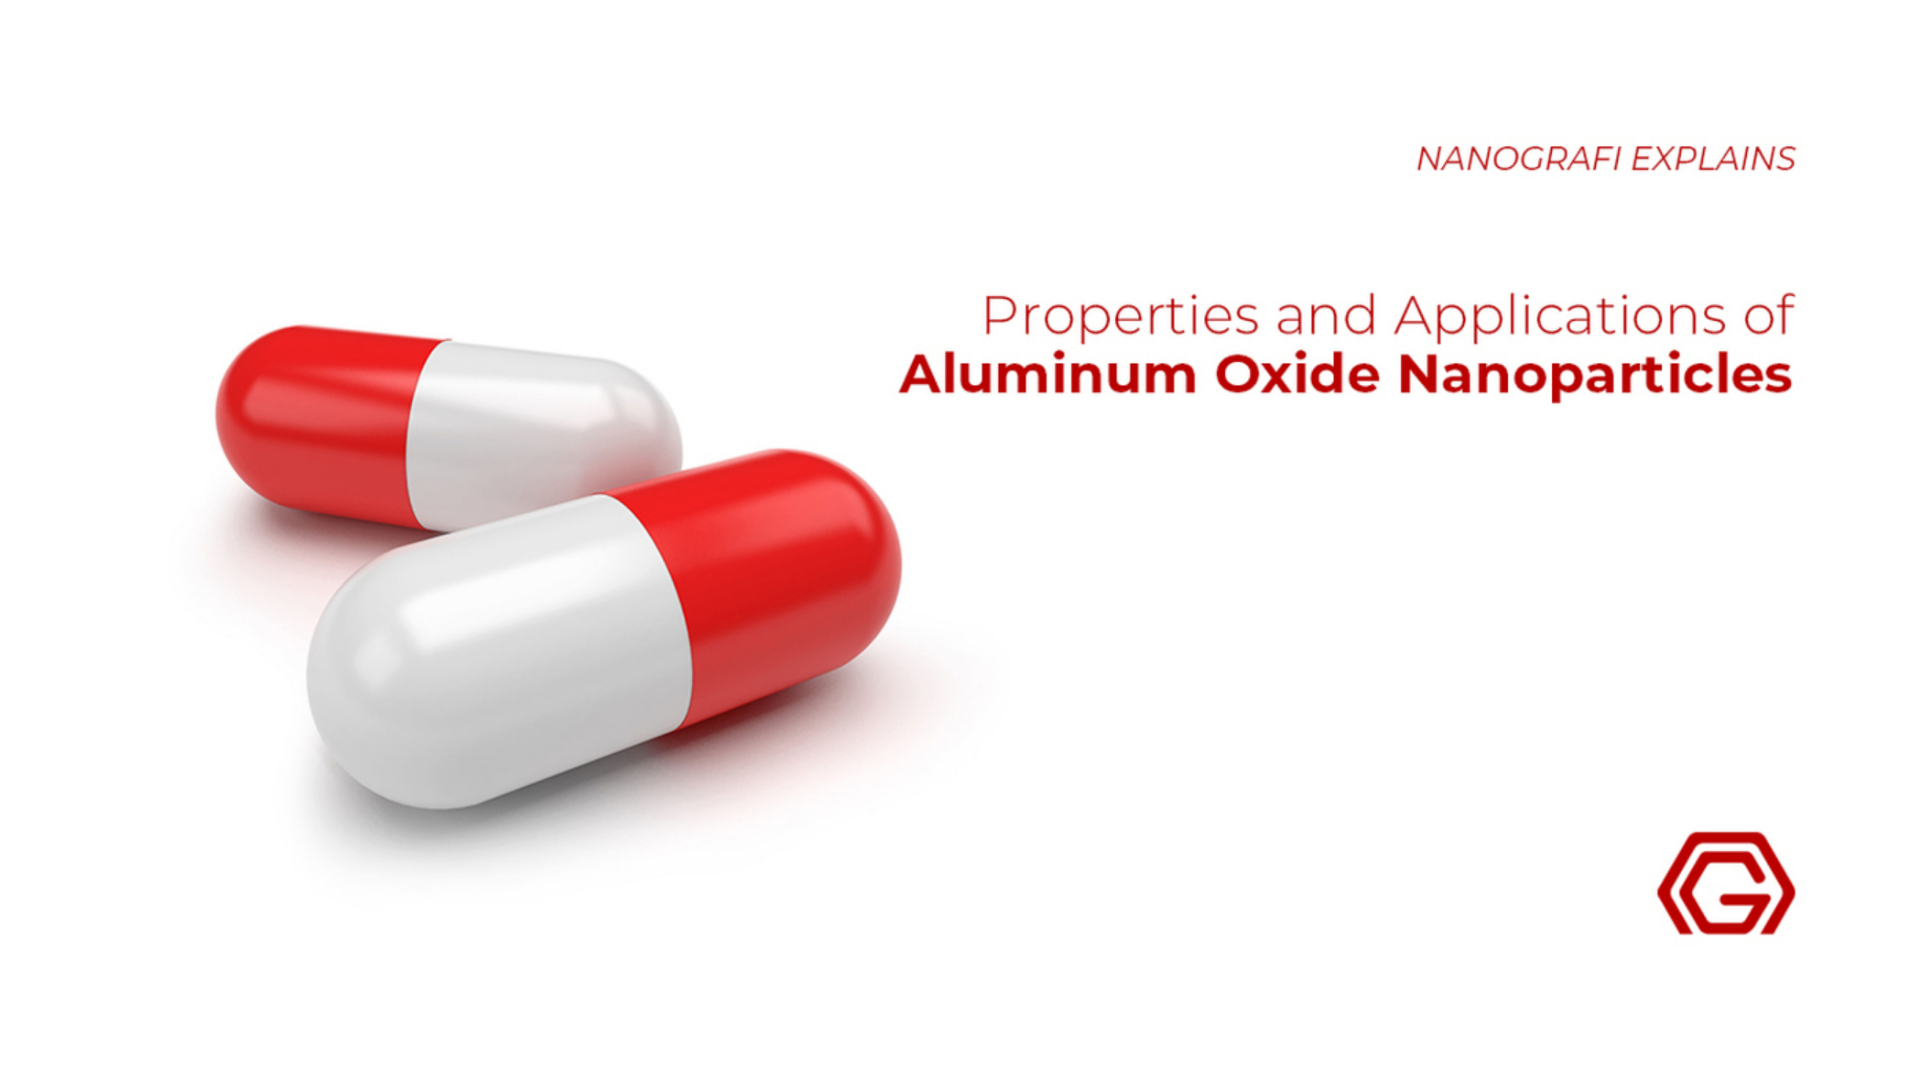 Properties and applications of aluminum oxide nanoparticles